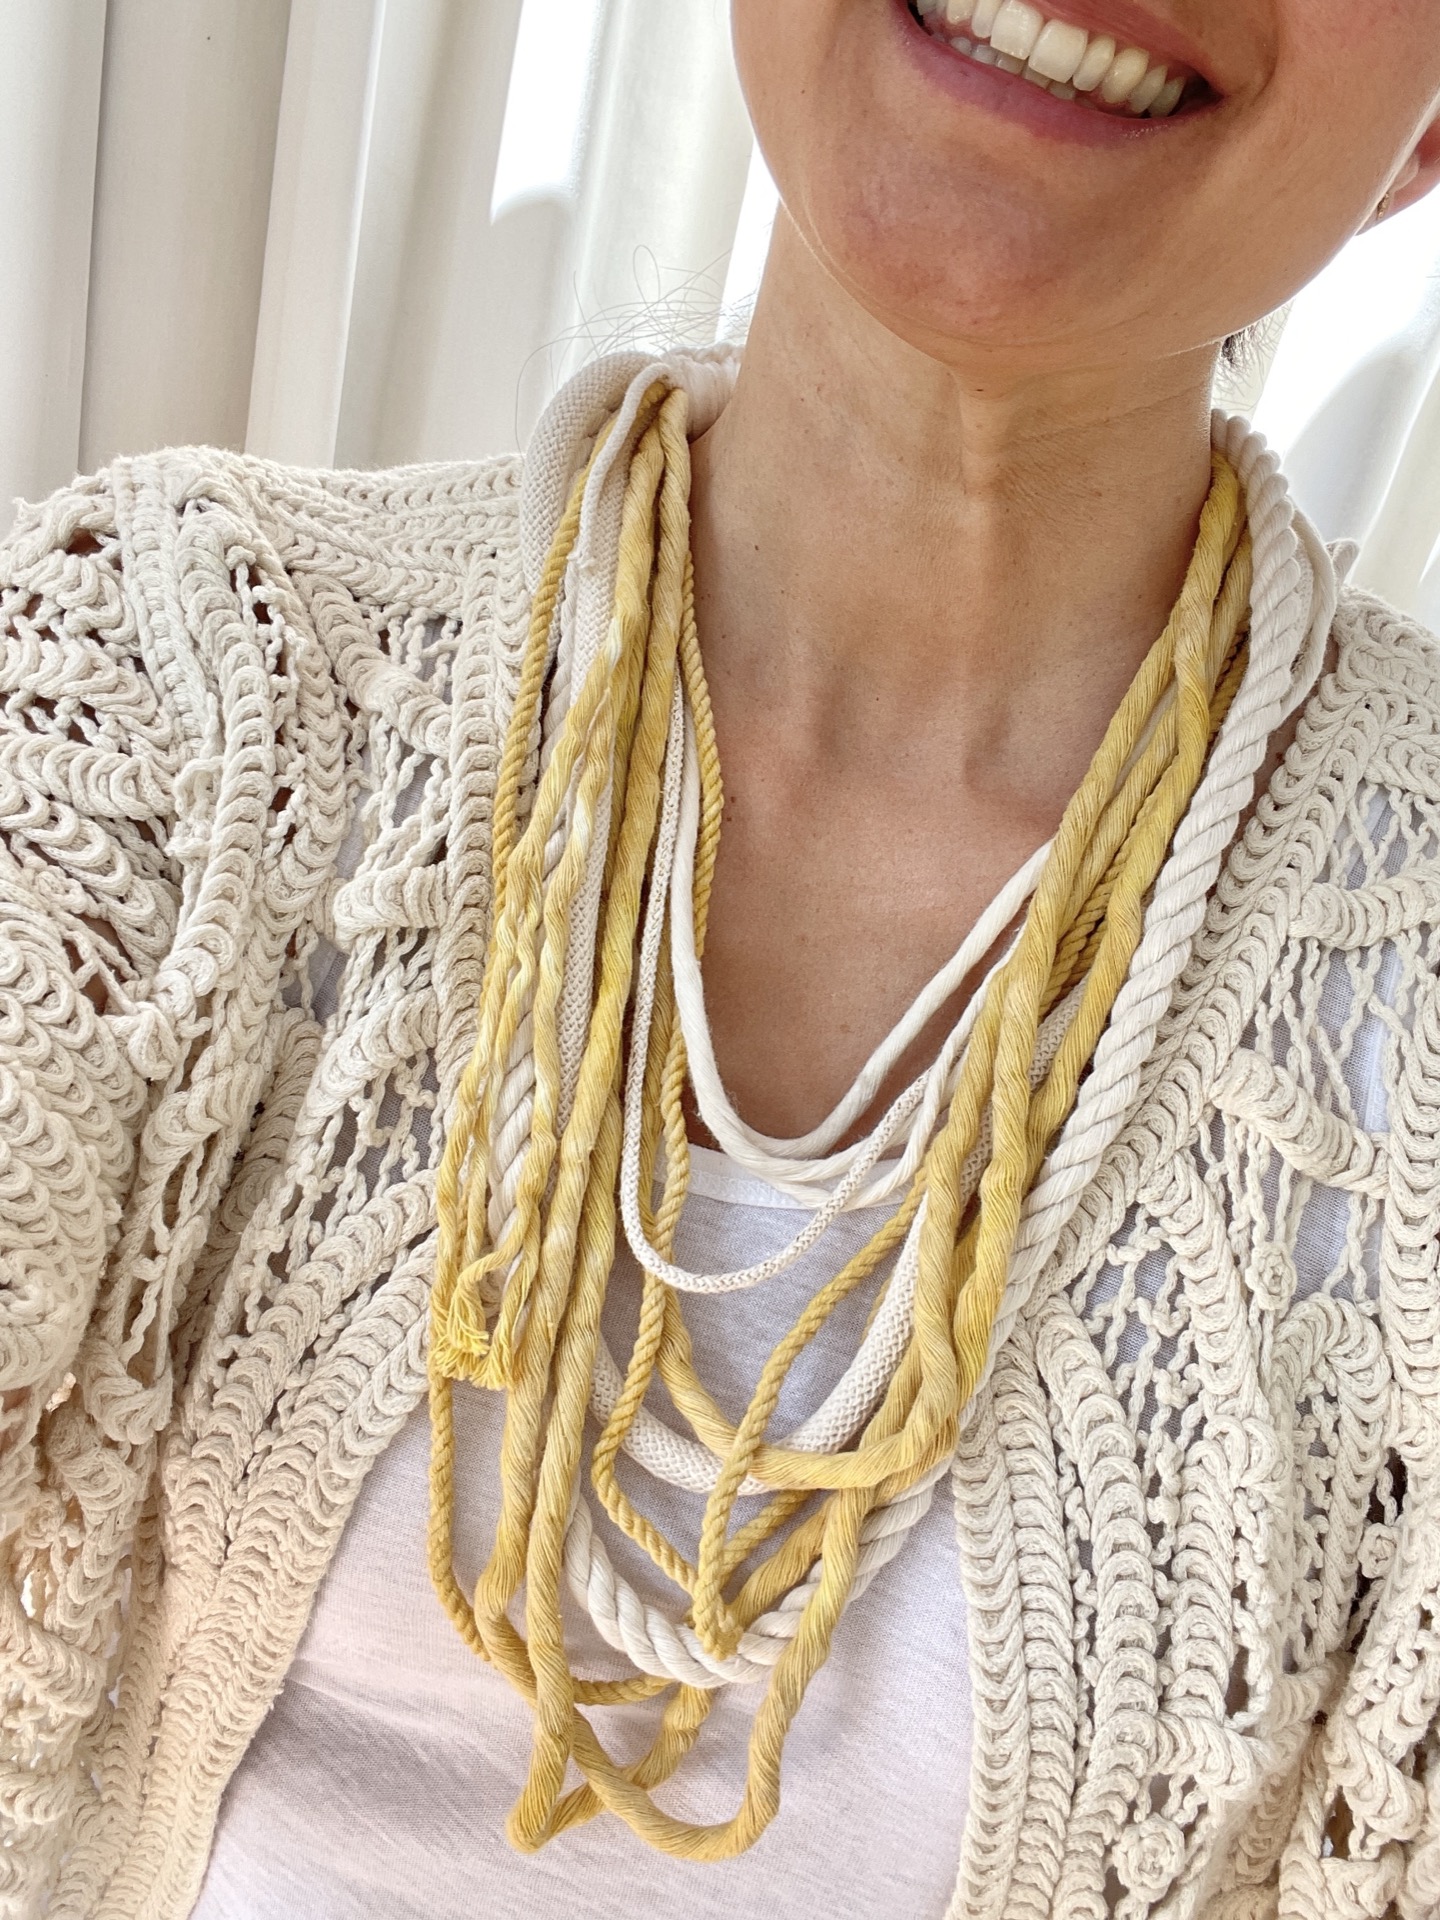 Natural dyed macrame necklace in natural and yellow shades